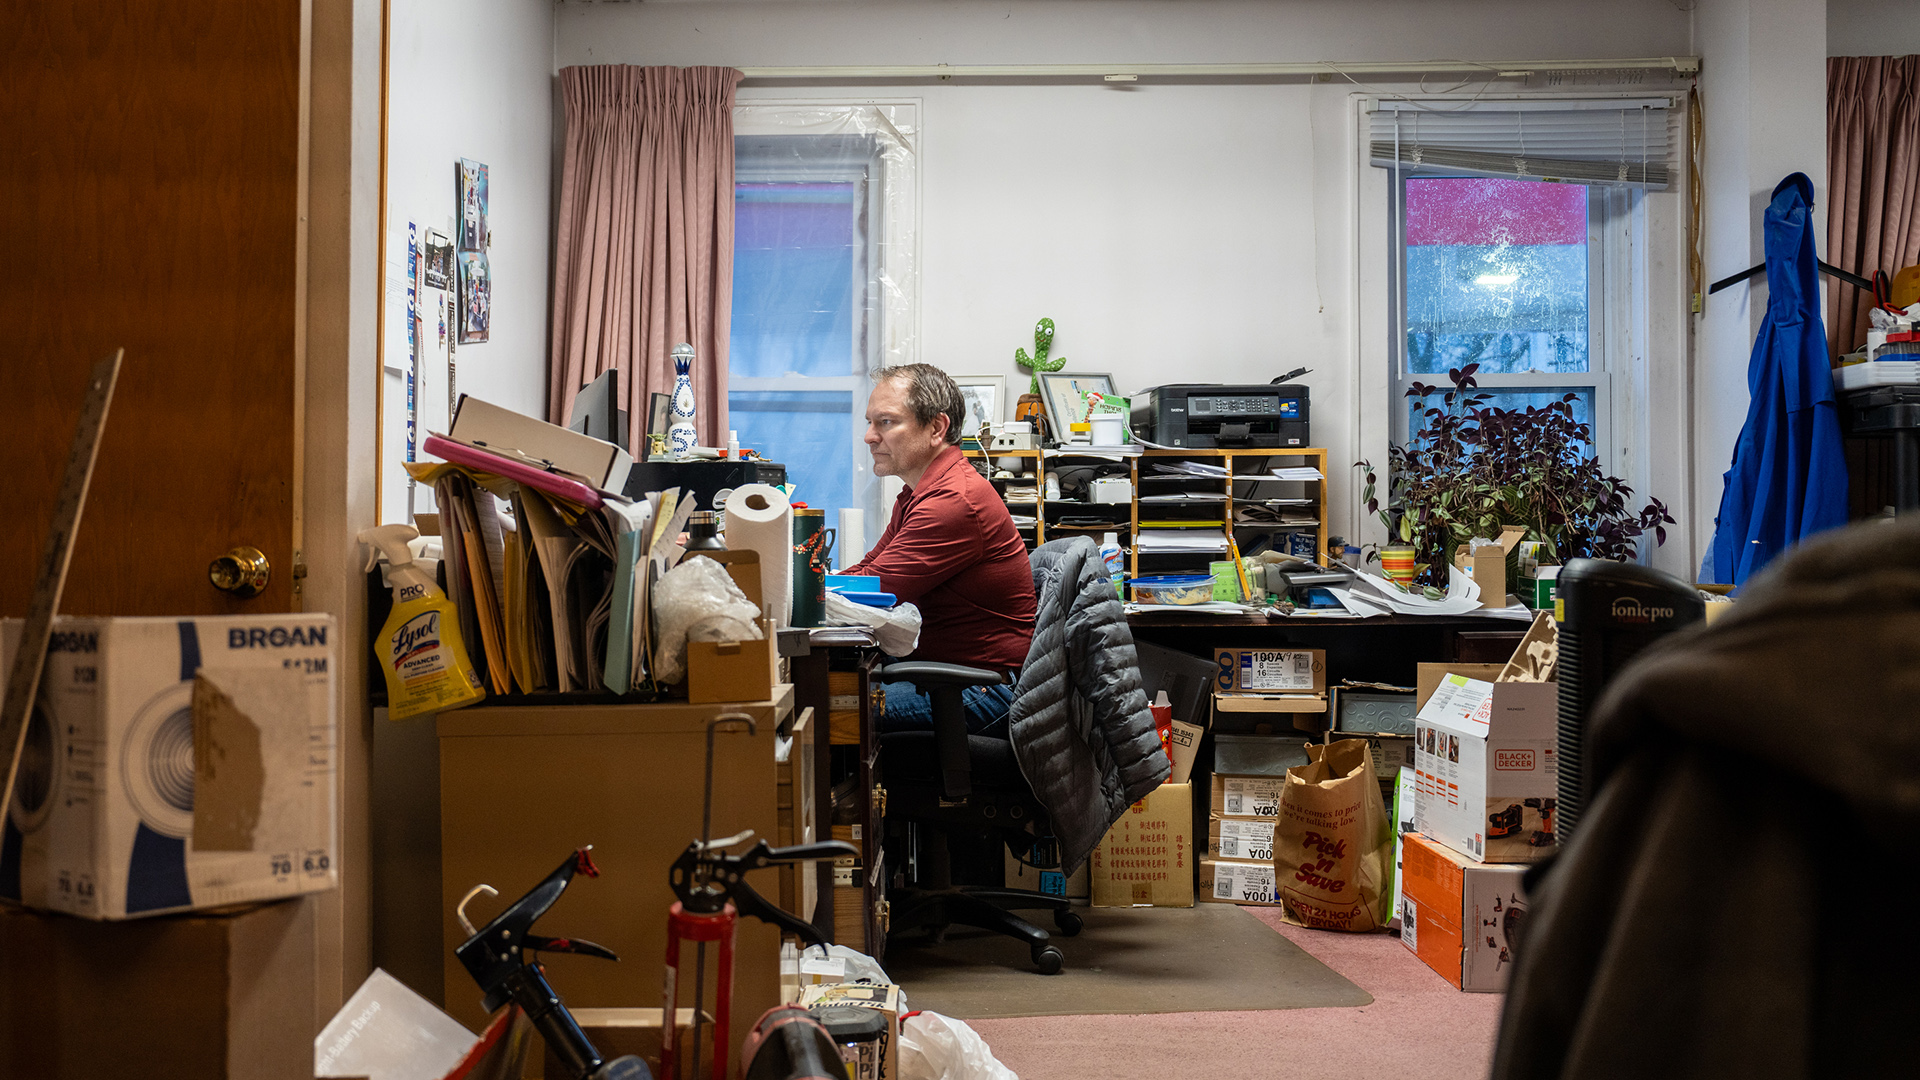 Sam Stair sits in a chair and faces a desk in a room with multiple stacks of boxes and other items and a table with a sorting shelf and other items on its surface against a wall with two windows with raised blinds.